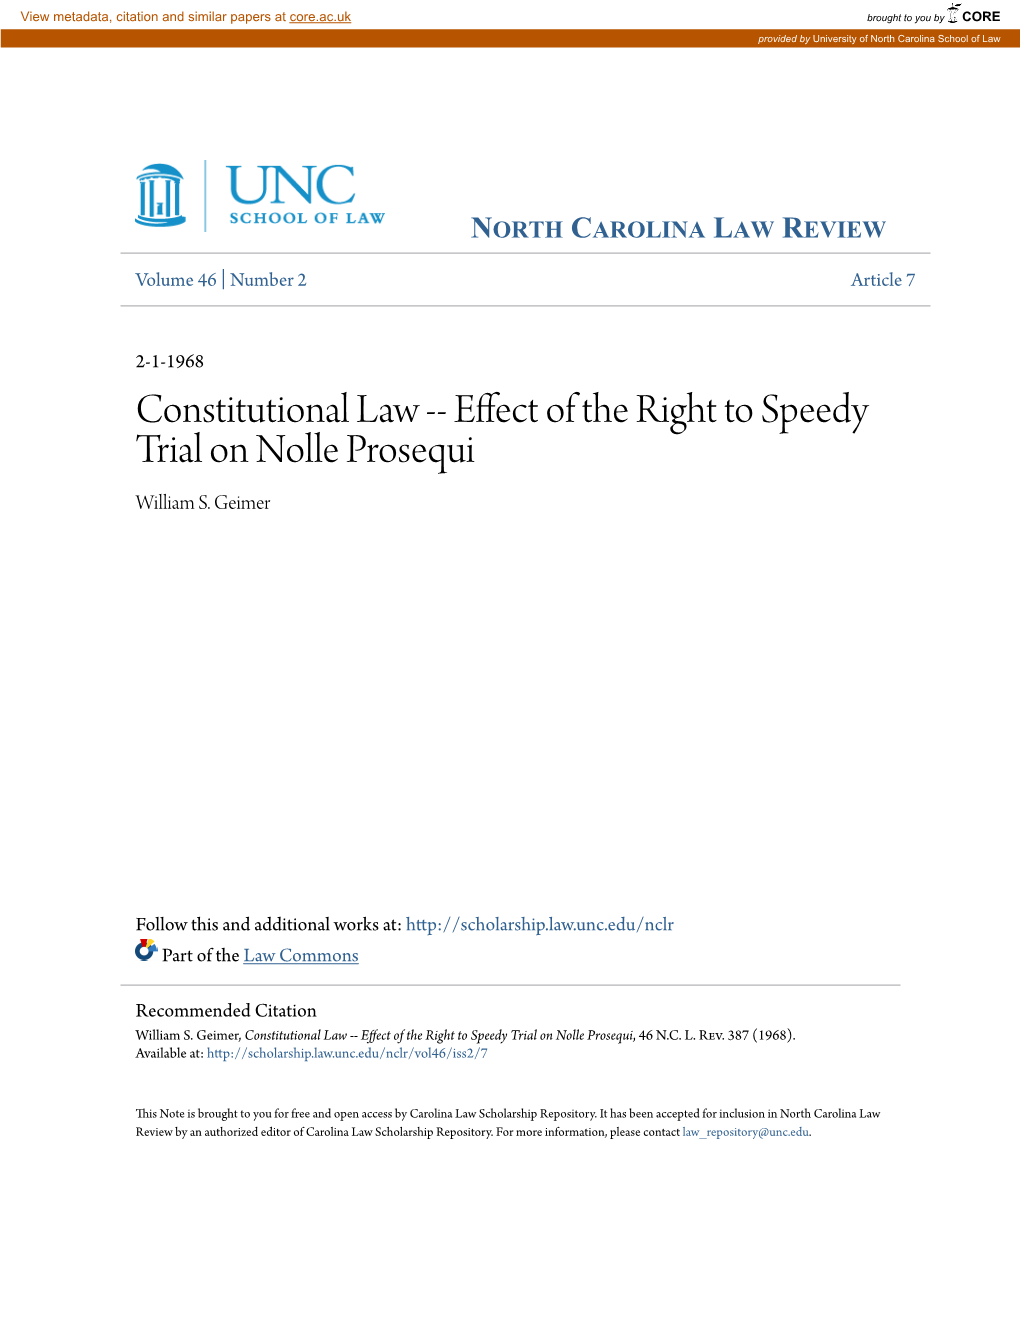 Effect of the Right to Speedy Trial on Nolle Prosequi William S